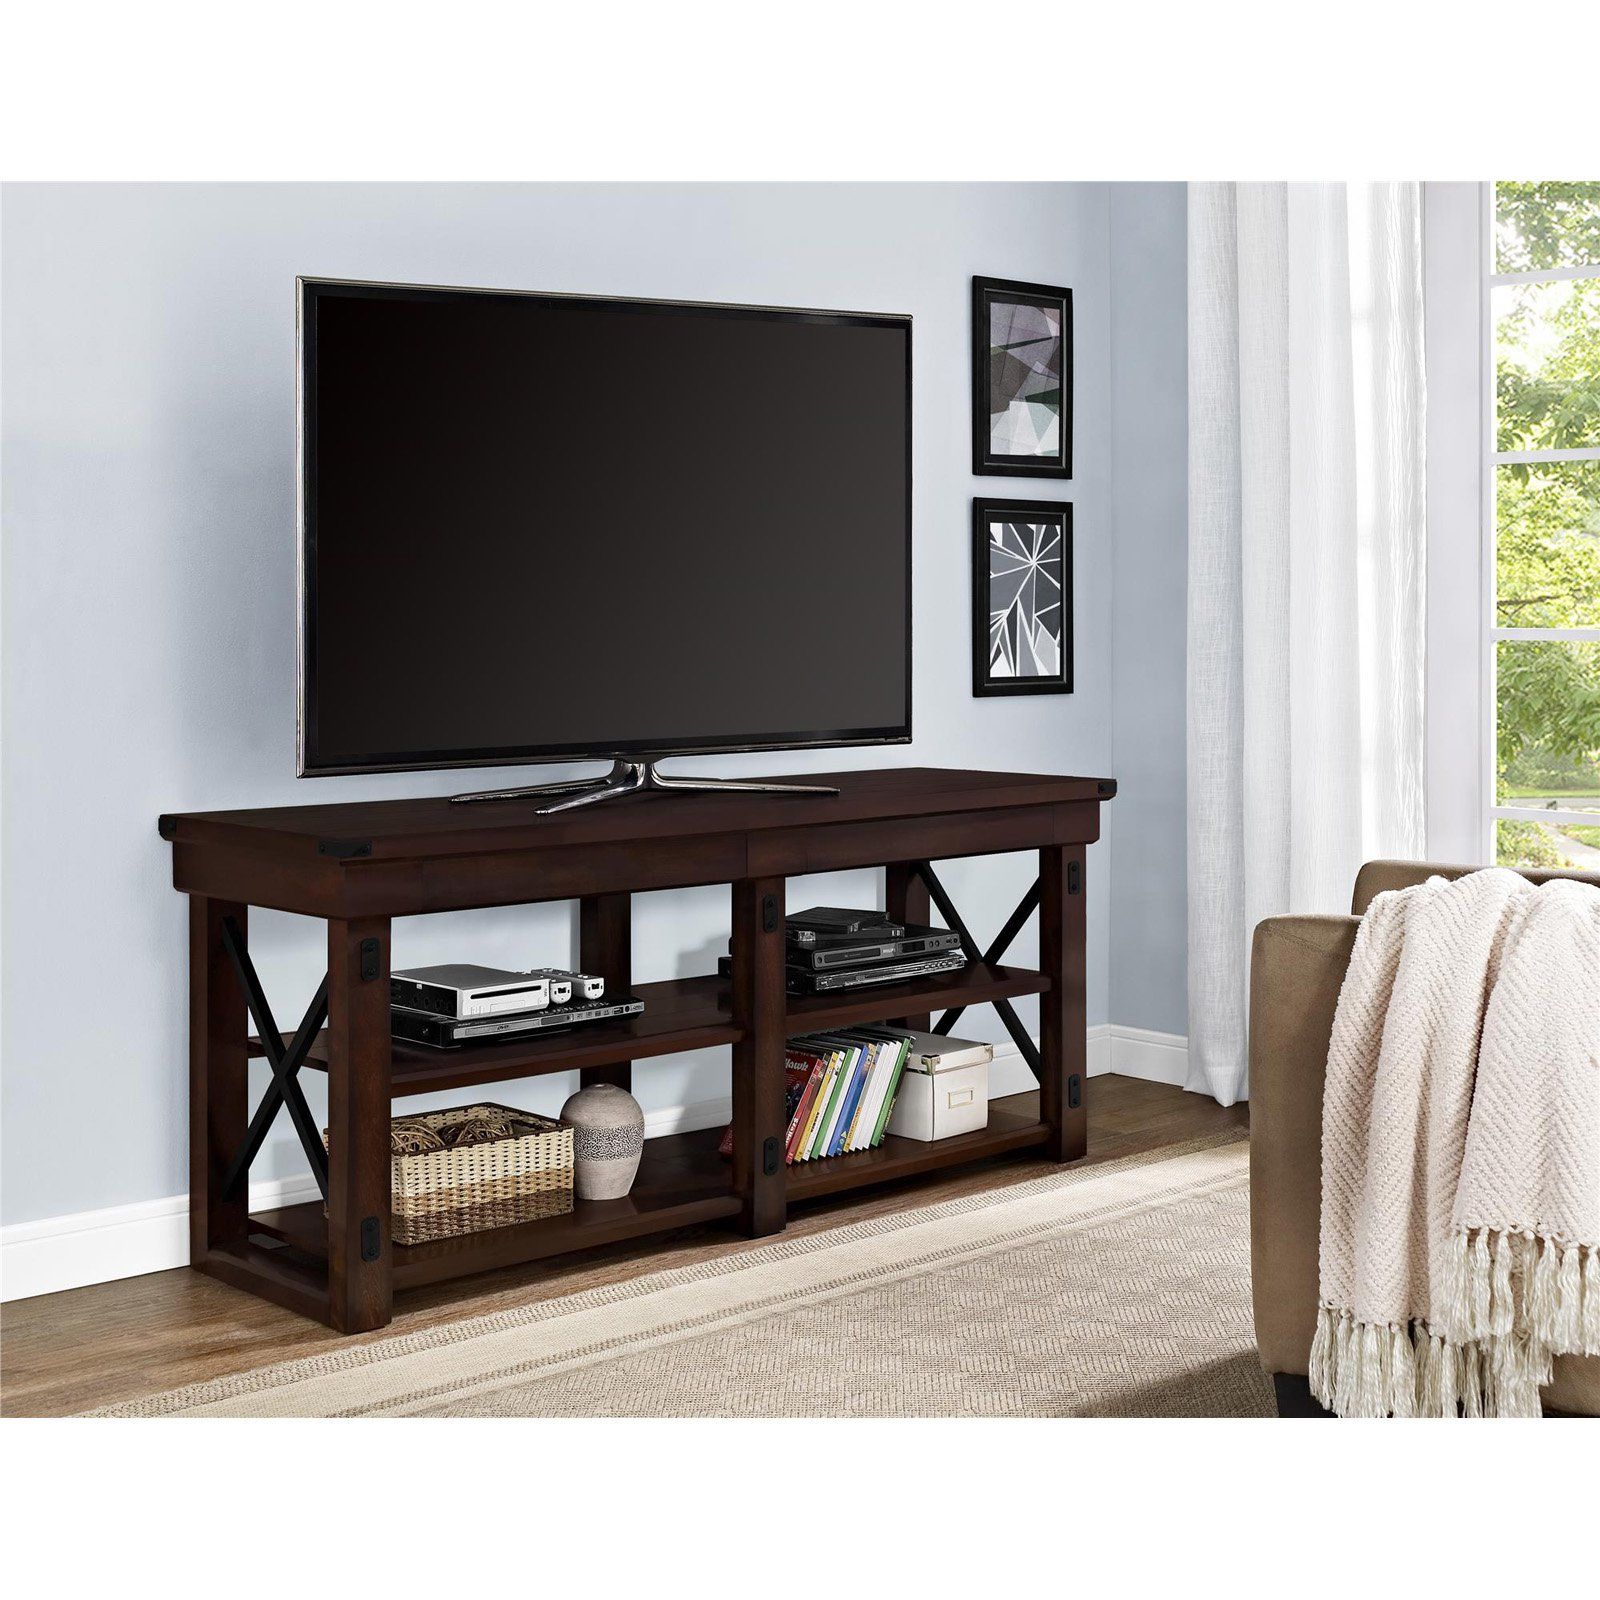 Ameriwood Home Wildwood Tv Stand For Tvs Up To 65 Throughout Jowers Tv Stands For Tvs Up To 65" (View 6 of 15)